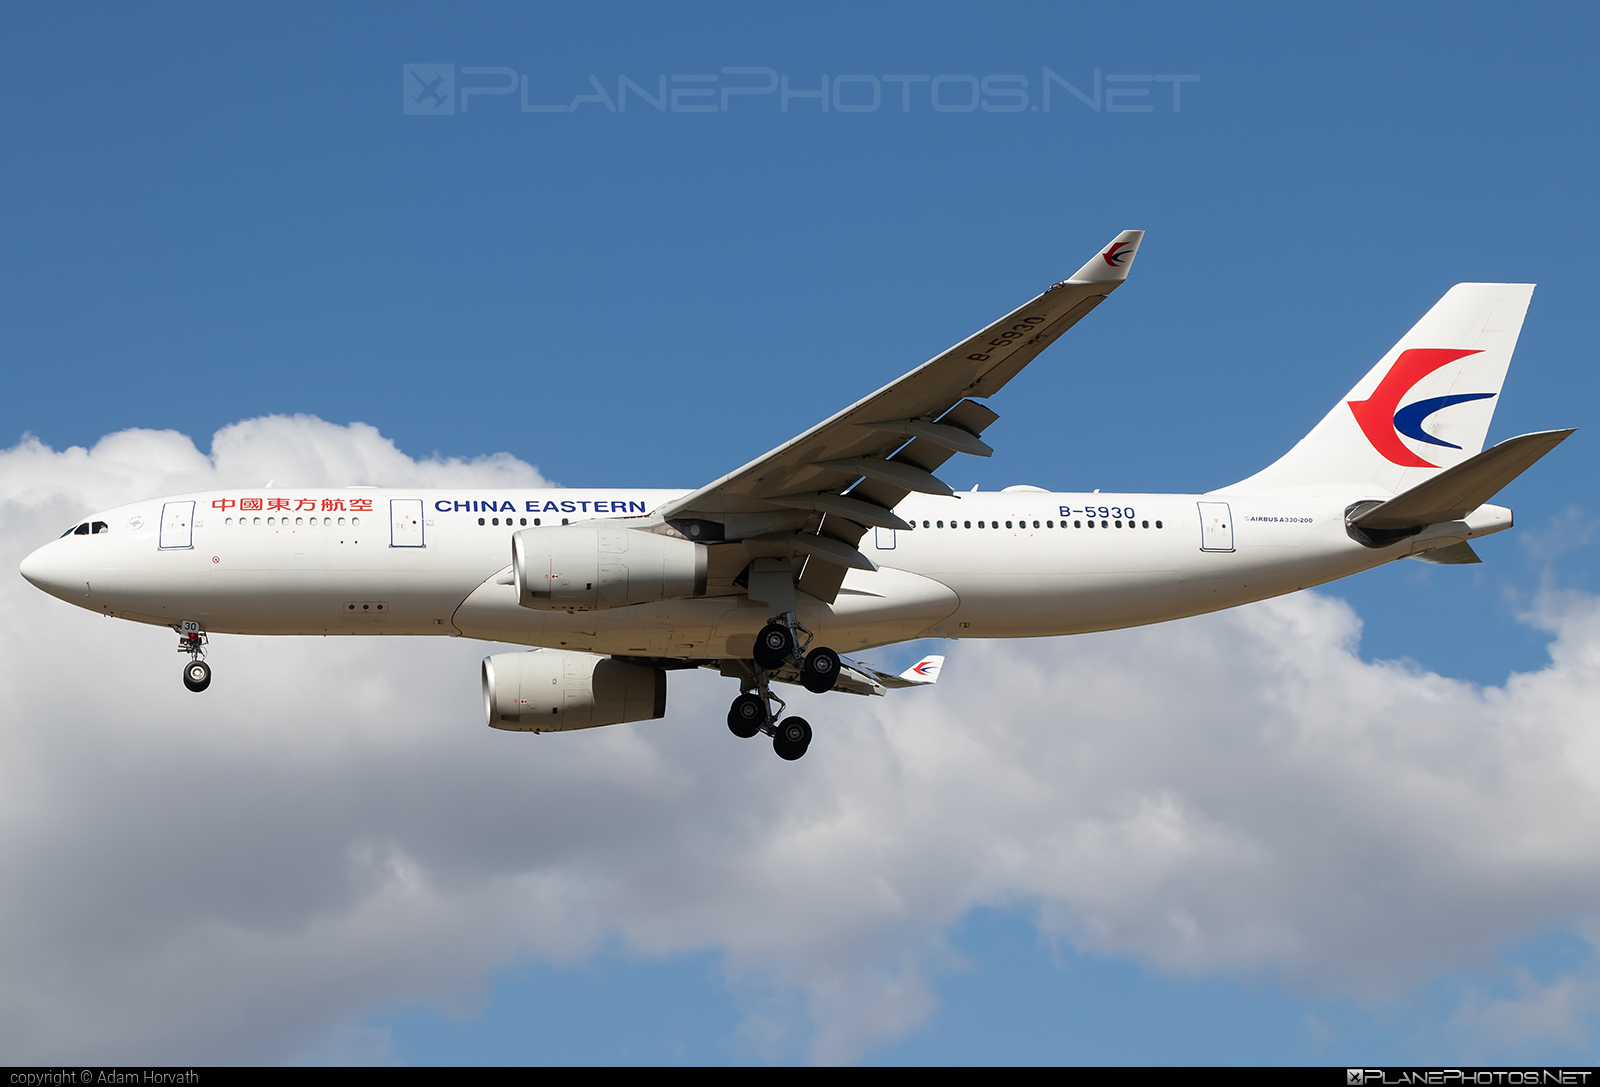 Airbus A330-243 - B-5930 operated by China Eastern Airlines #a330 #a330family #airbus #airbus330 #chinaeastern #chinaeasternairlines